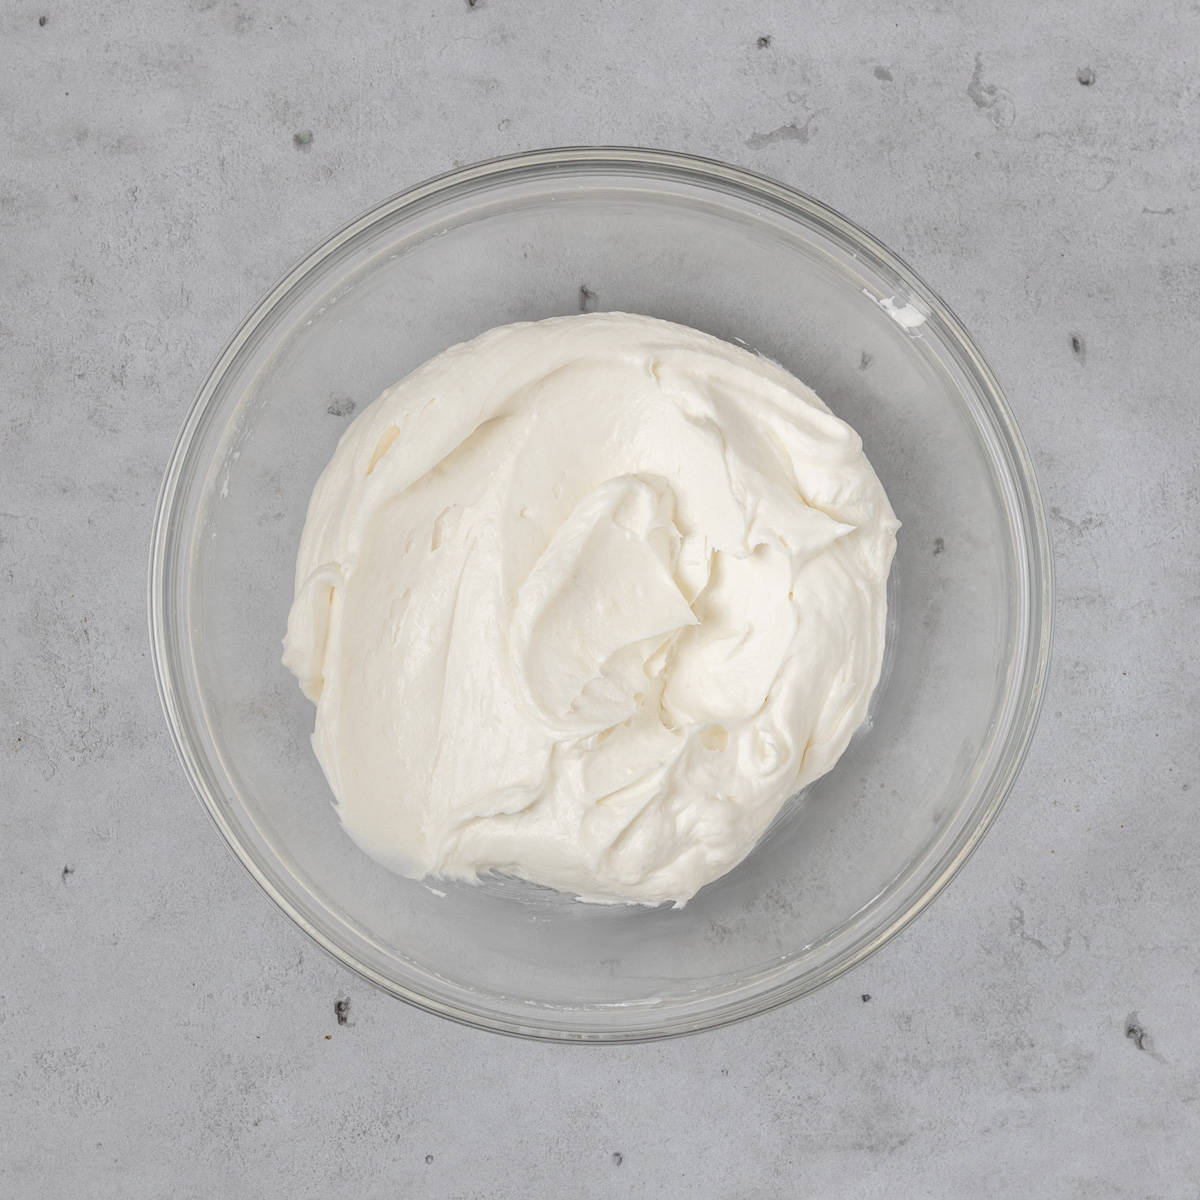 the whipped cream cheese frosting in a glass bowl on a grey background.